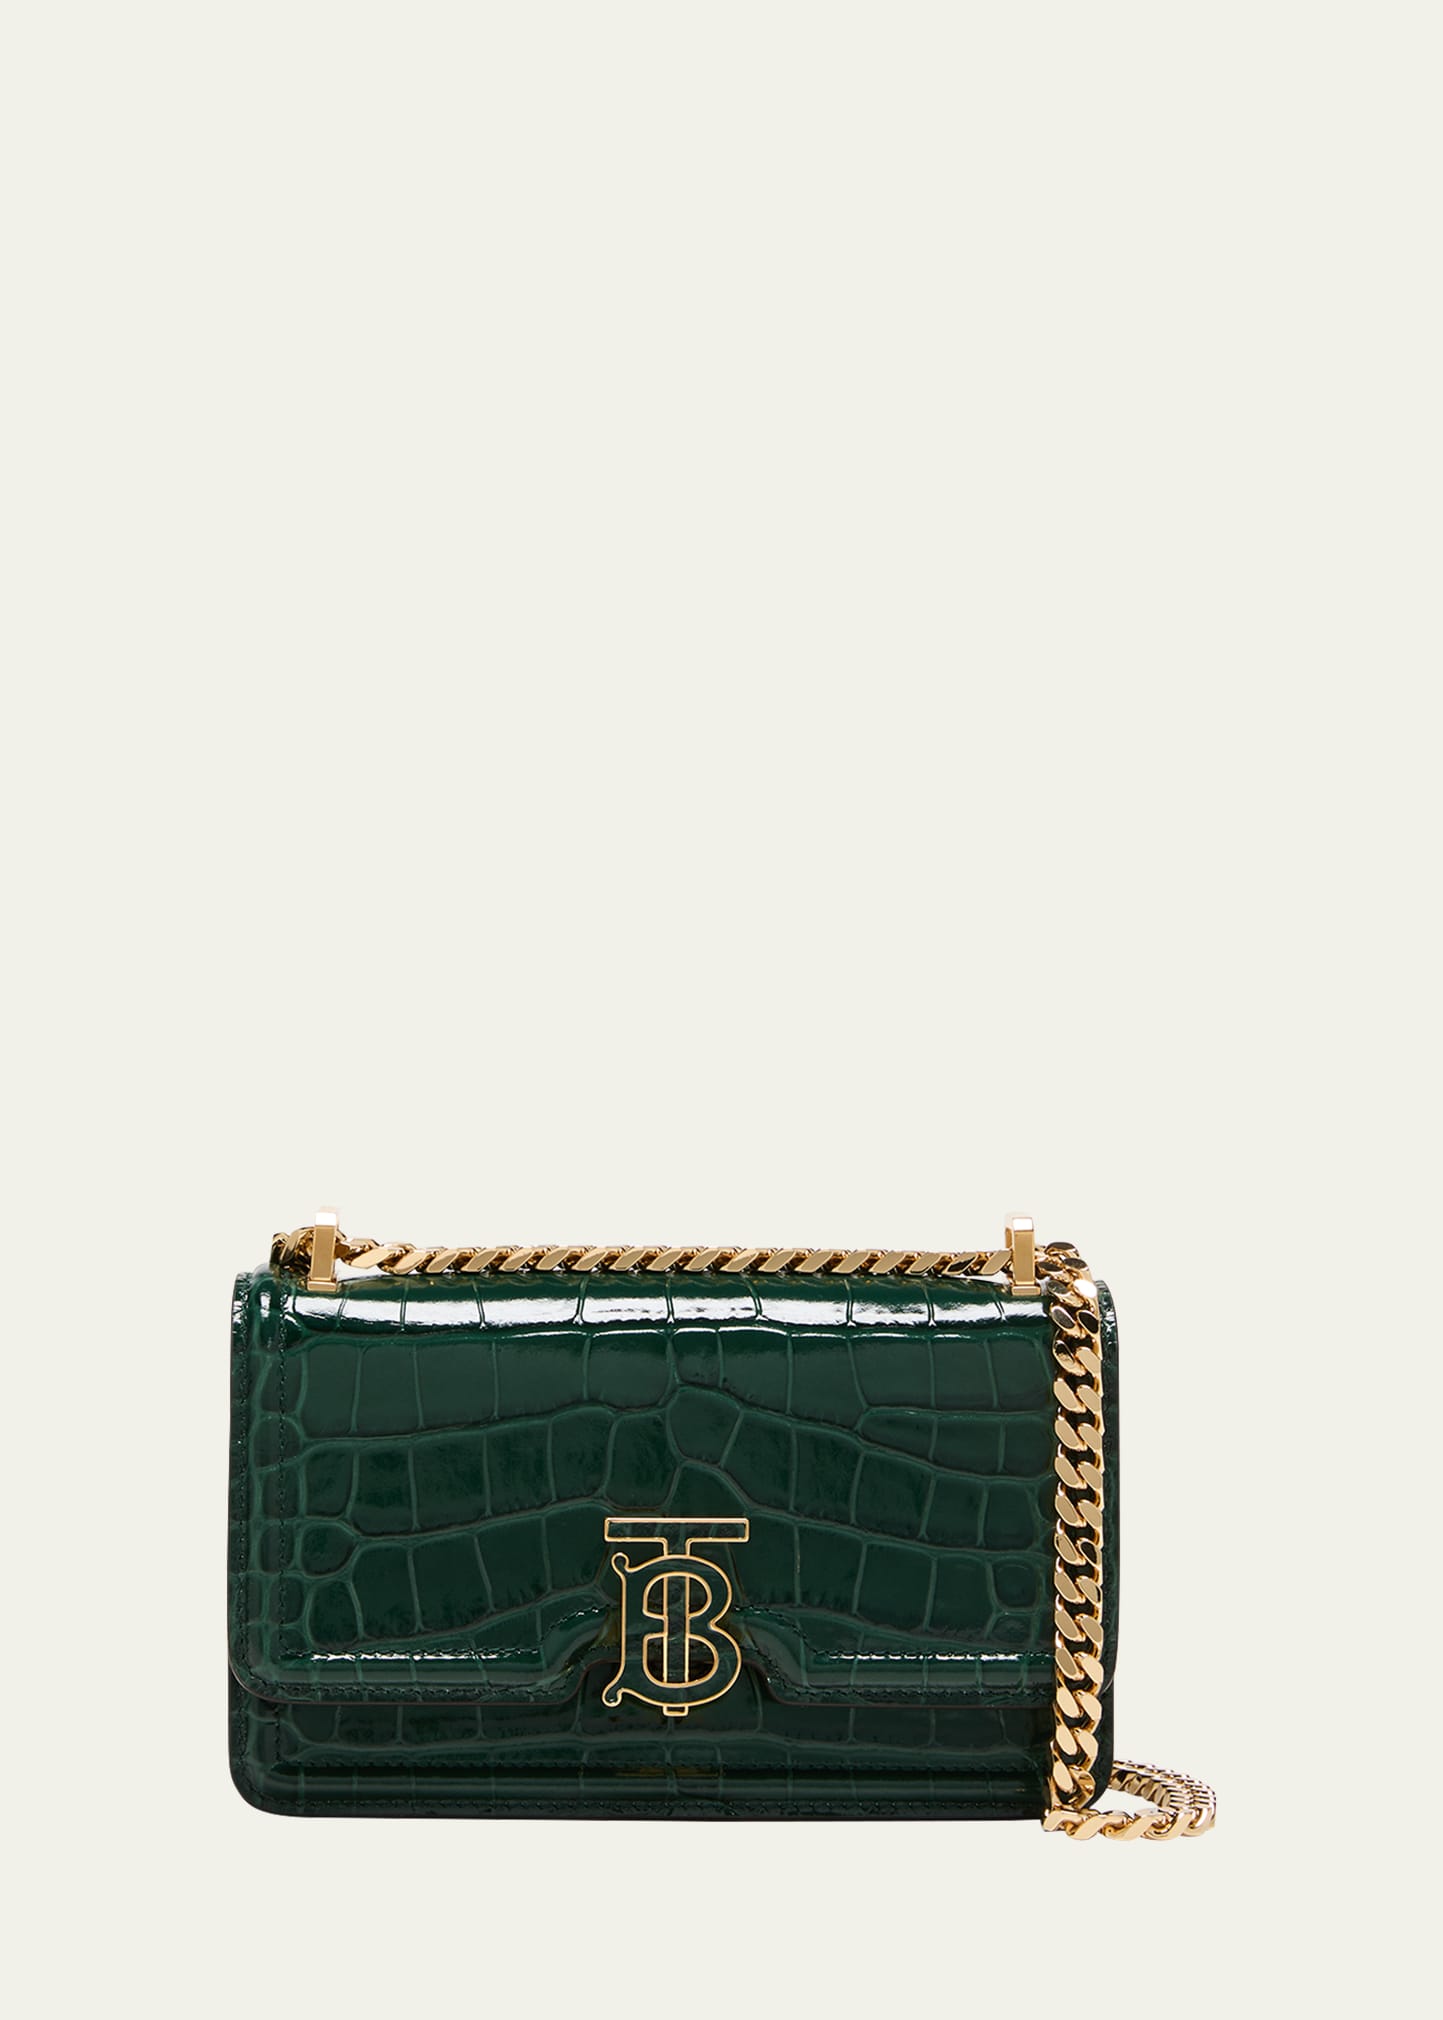 BURBERRY: TB bag in crocodile print leather with monogram - Green